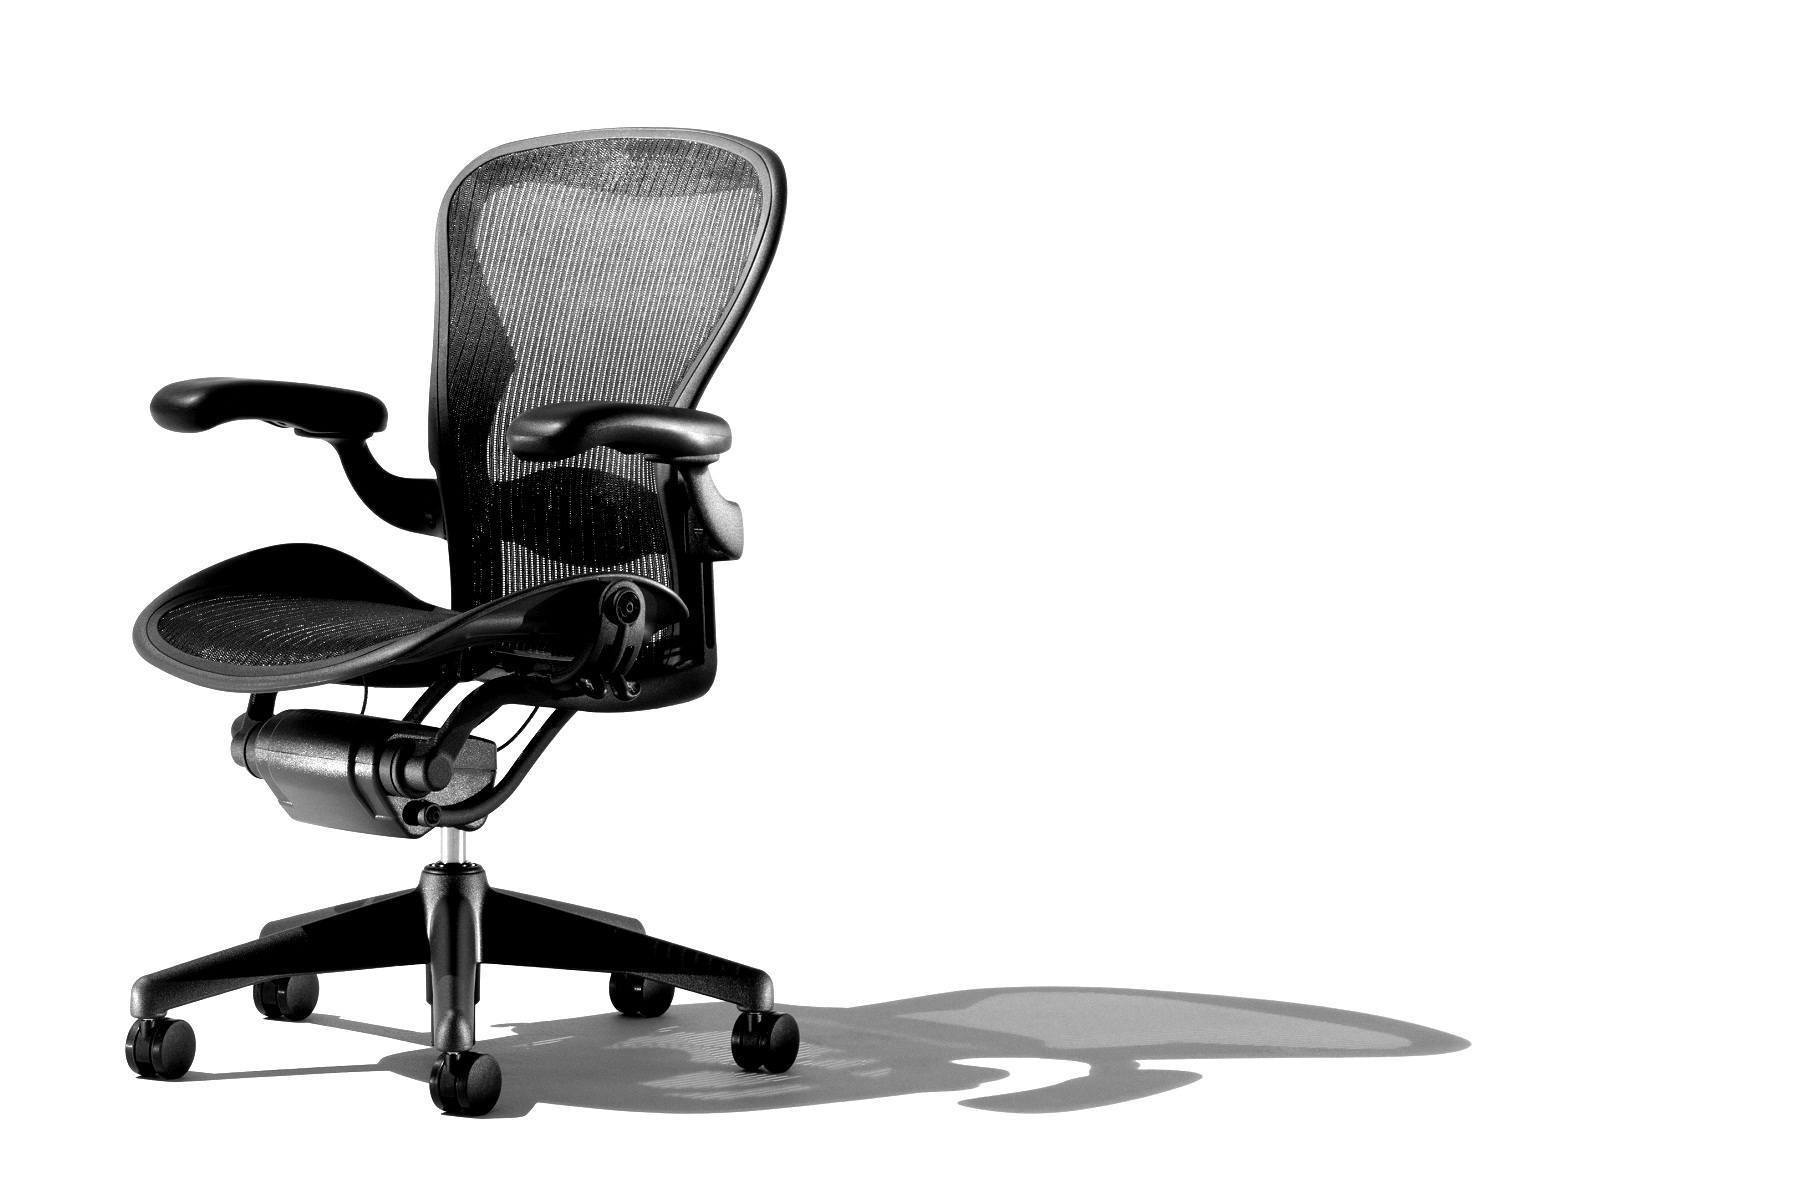 Aeron Chair and Embody Chair Singapore - Order Here